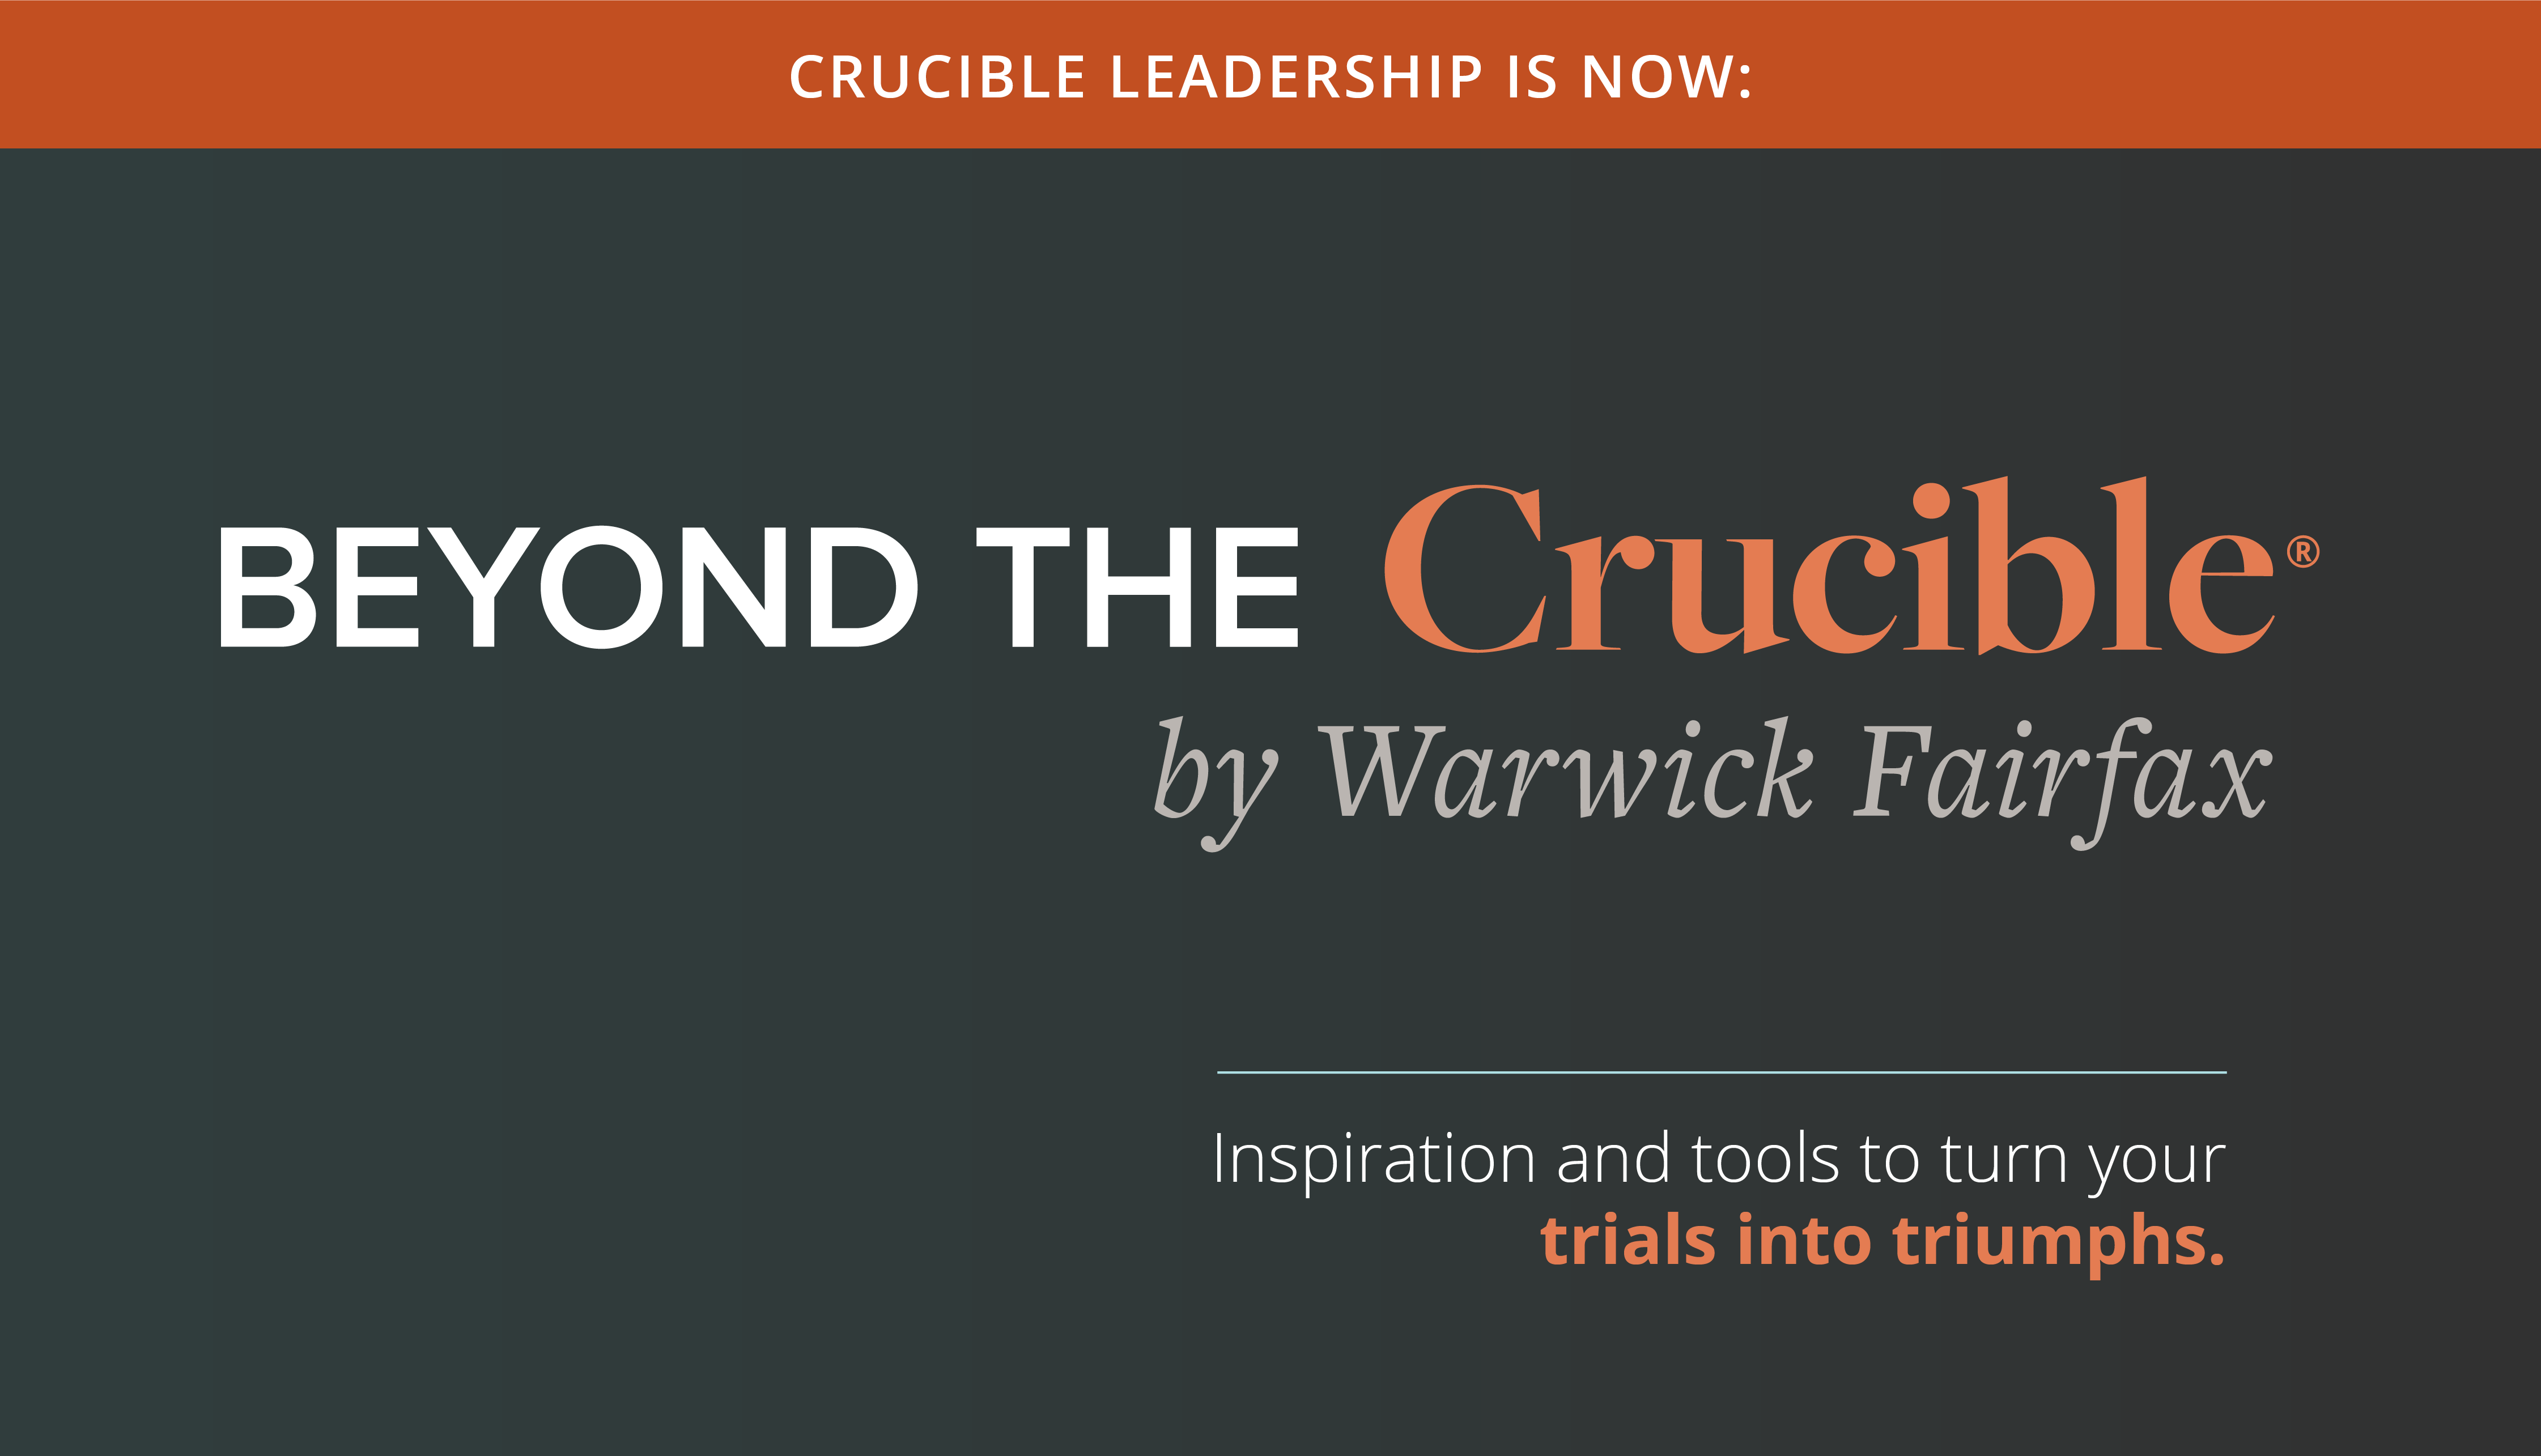 We’re Moving on From Crucible Leadership. Here’s Why That’s a Good Thing